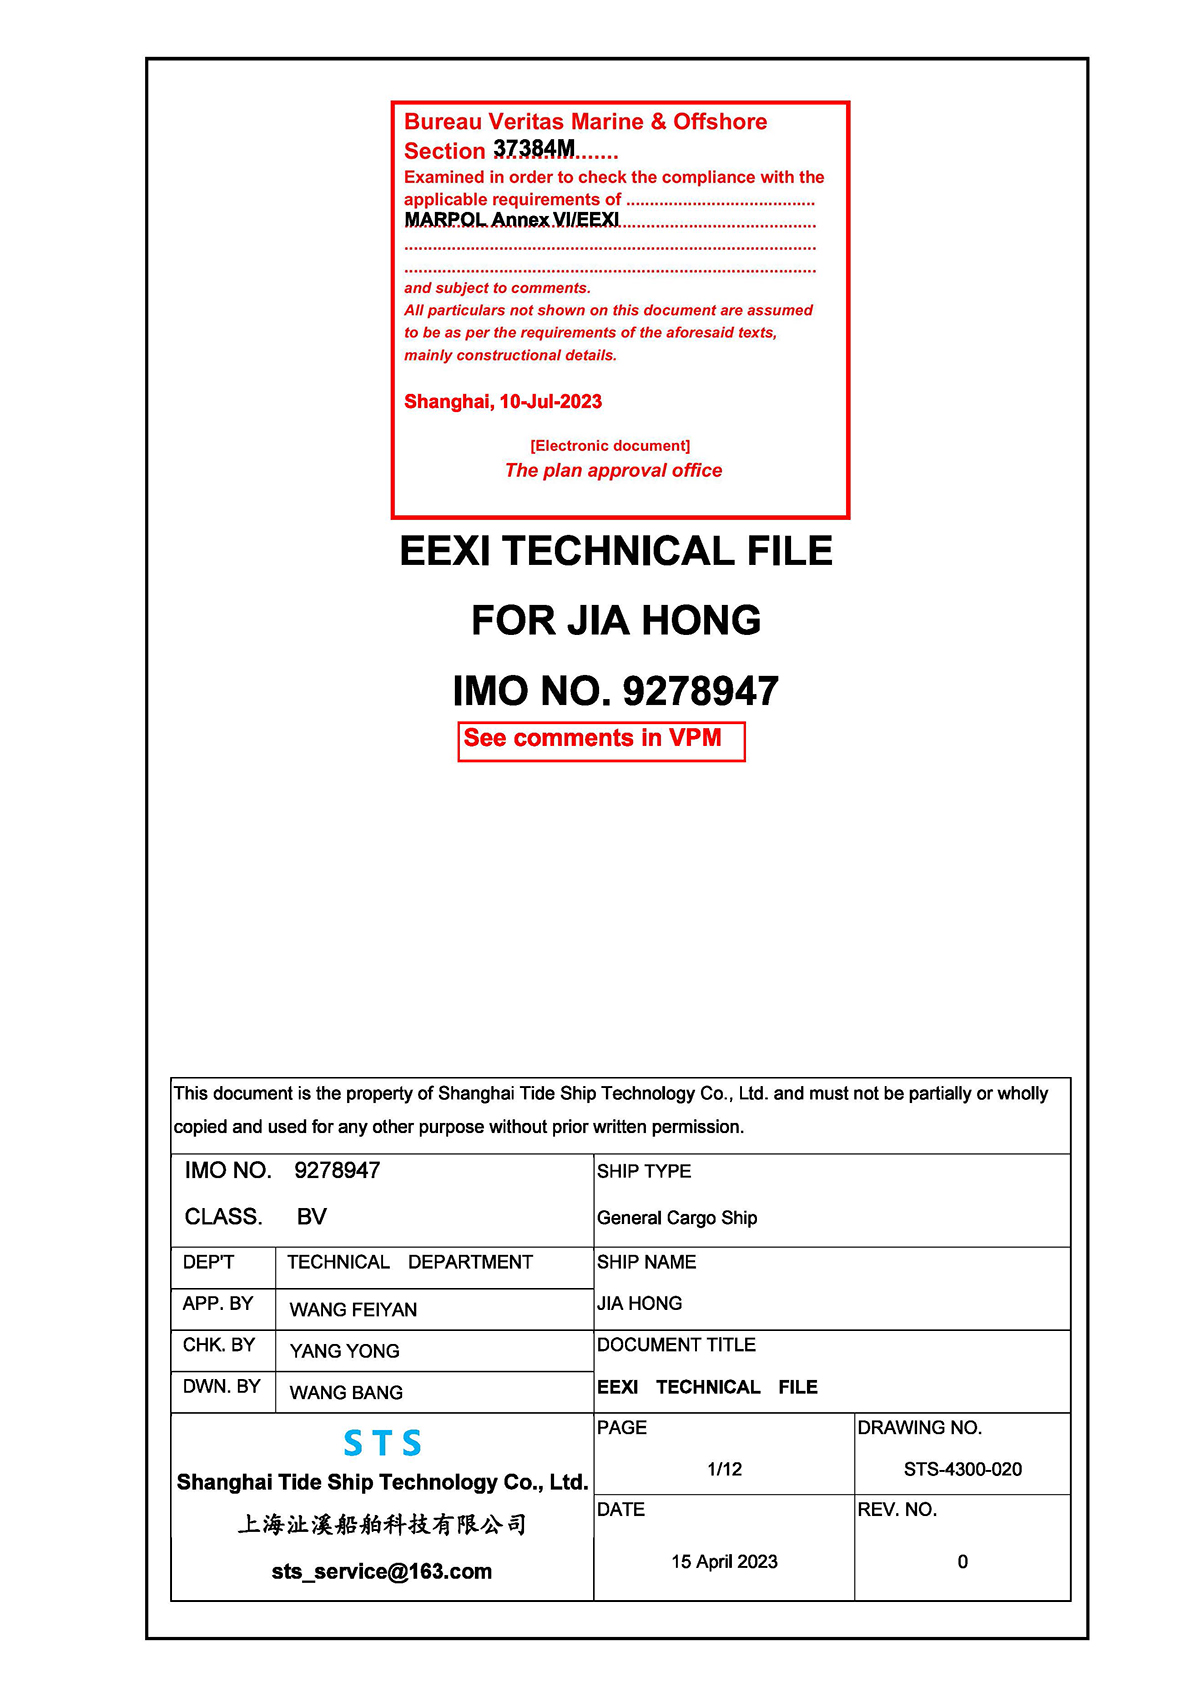 1 BV CLASS APPROVED EEXI TECHNICAL FILE.jpg